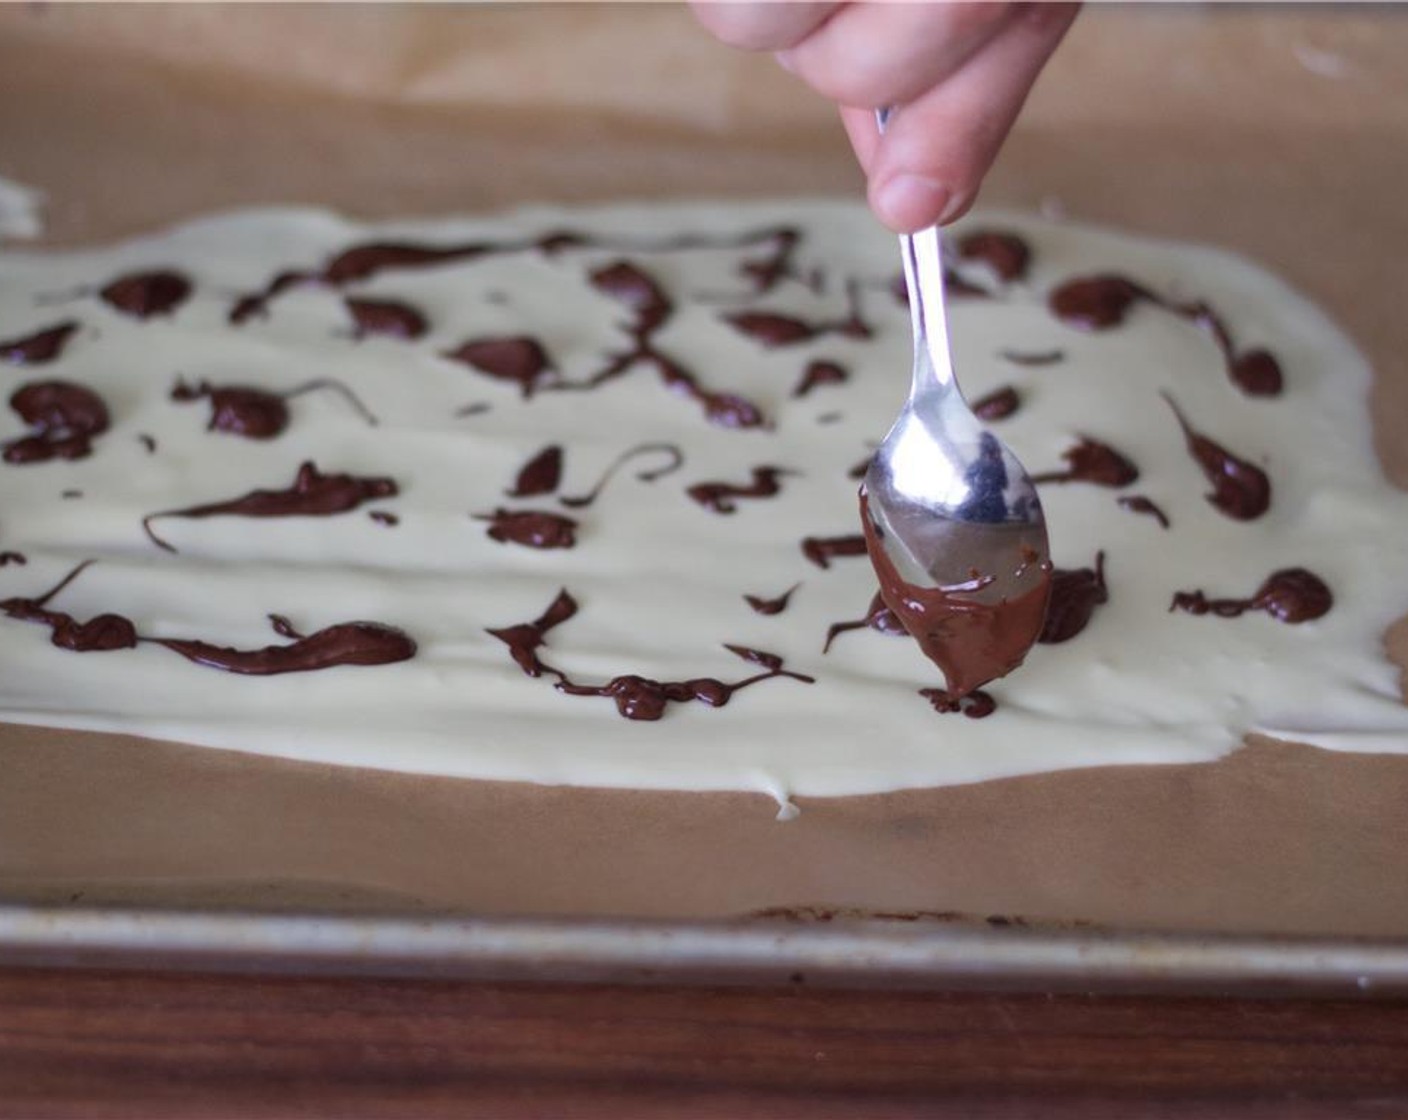 step 4 Using a spoon, quickly make dots and patterns on top of the white chocolate.